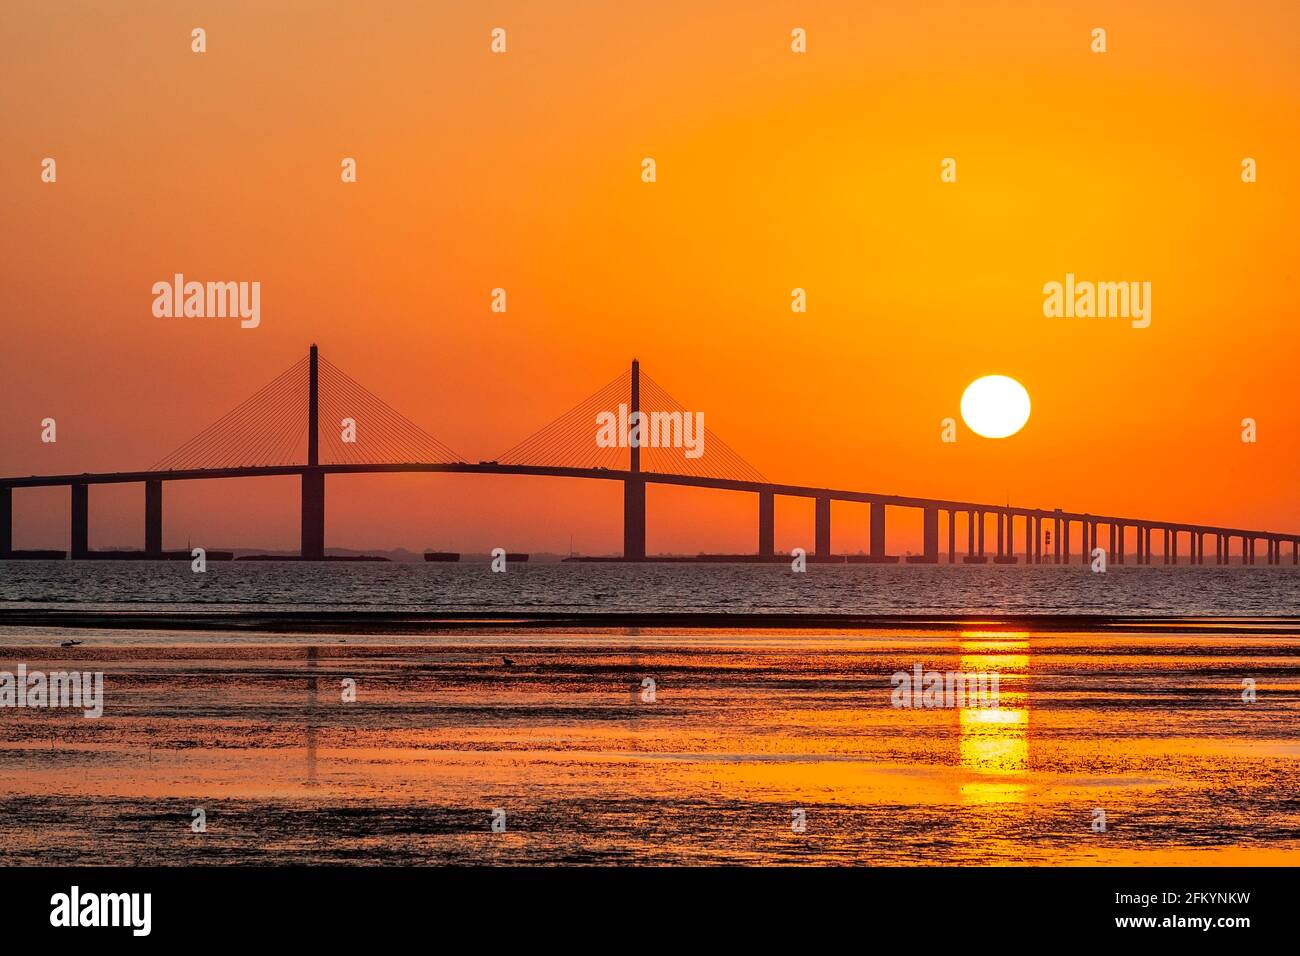 The Bob Graham Sunshine Skyway Bridge, often referred to as the Sunshine Skyway Bridge or simply the Skyway, is a cable-stayed bridge spanning the Low Stock Photo